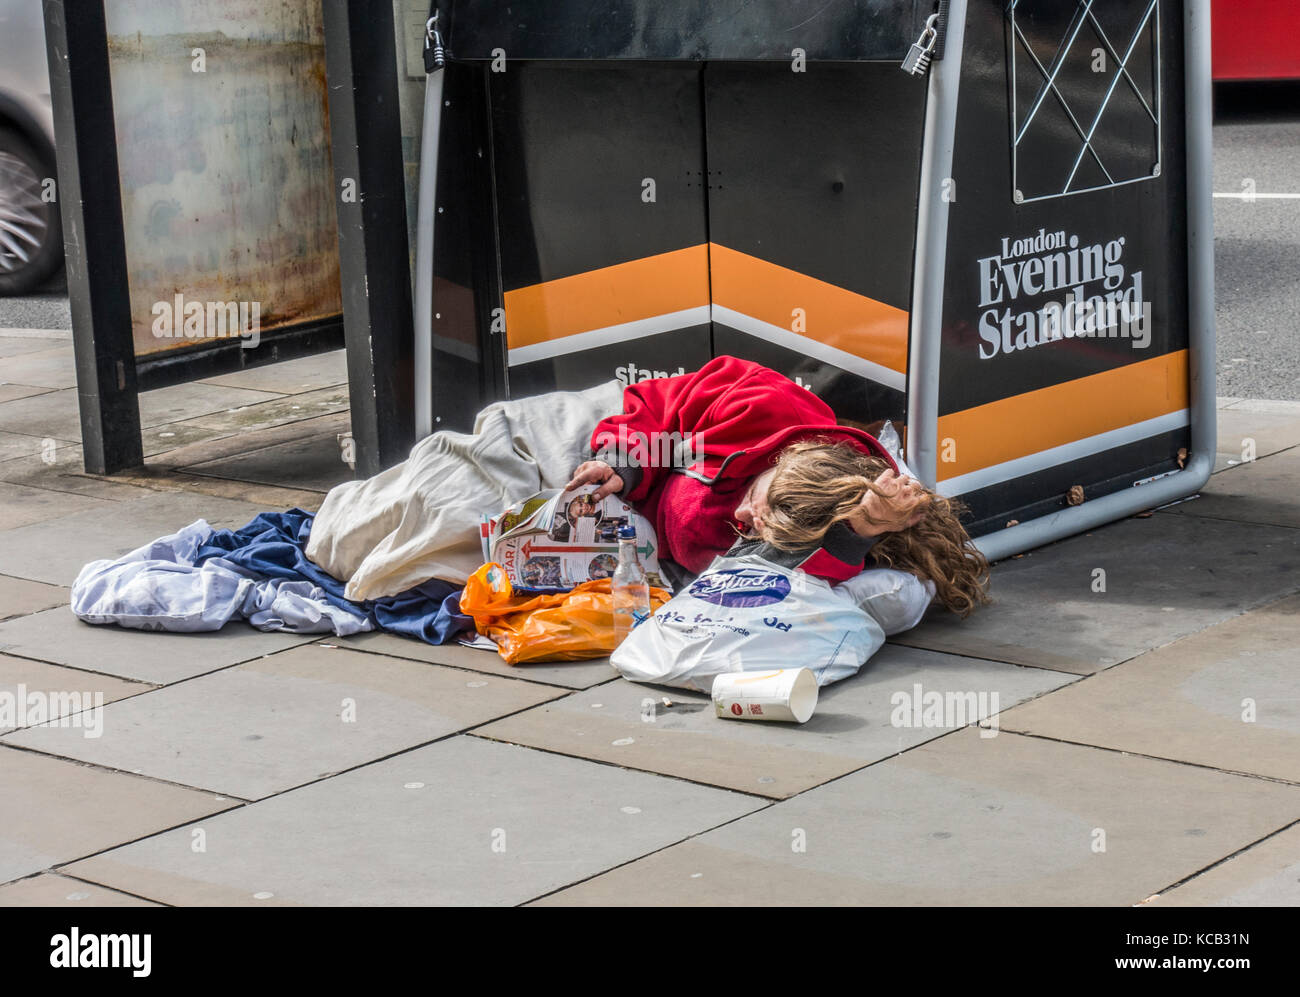 Rough sleeper / homeless person, reading a magazine next to an Evening Standard newspaper stand, lying down on the pavement in London, England, UK. Stock Photo